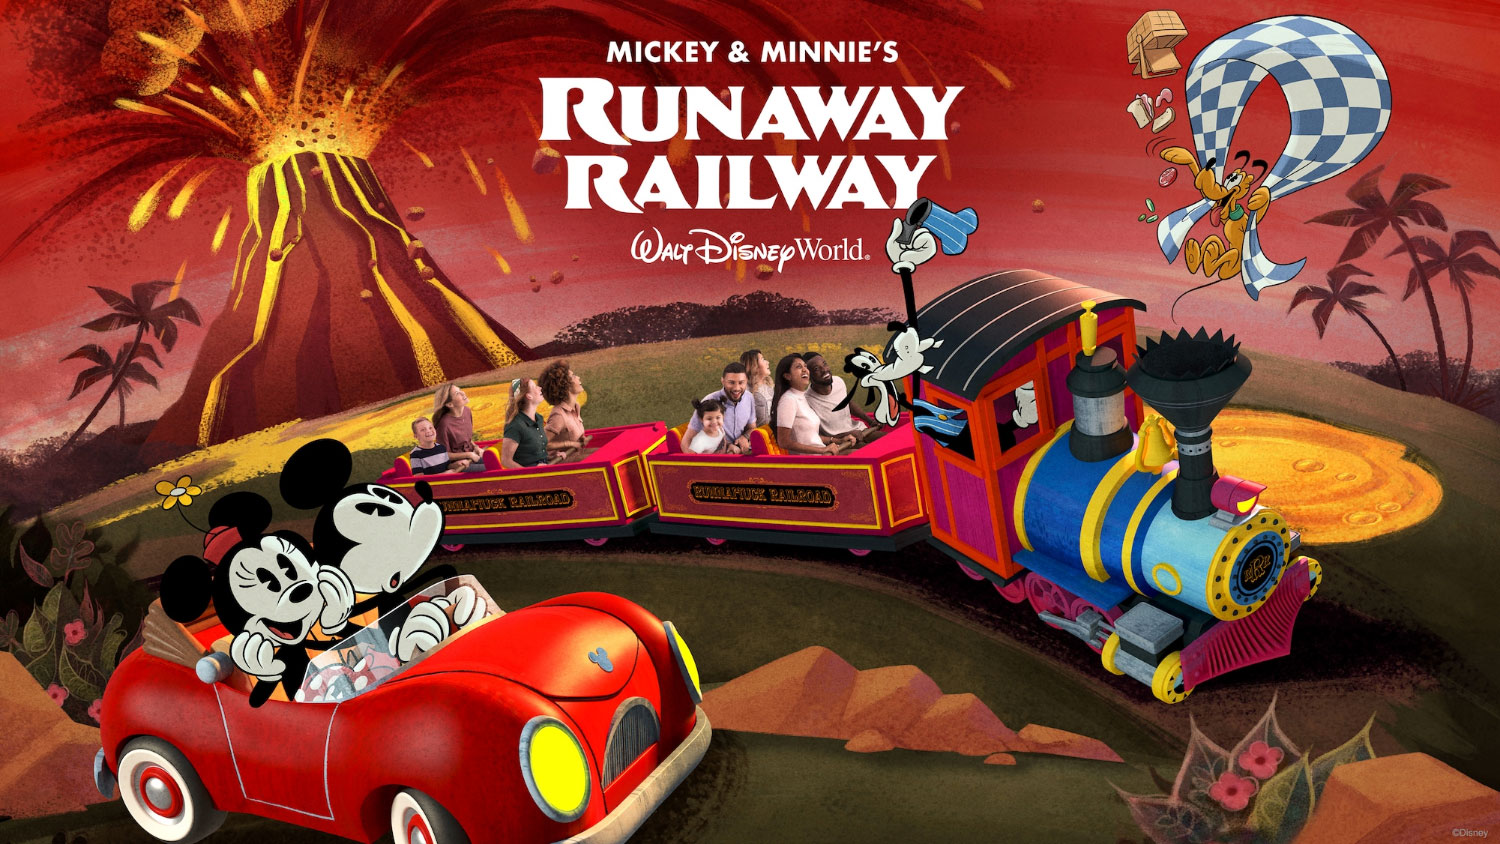 Artist rendition of Mickey & Minnie's Runaway Railway at Disney's Hollywood Studios®, Walt Disney World Resort®. Mickey and Minnie in a red runaway car as a red runaway train rides beside them with passengers. Volcano in background.